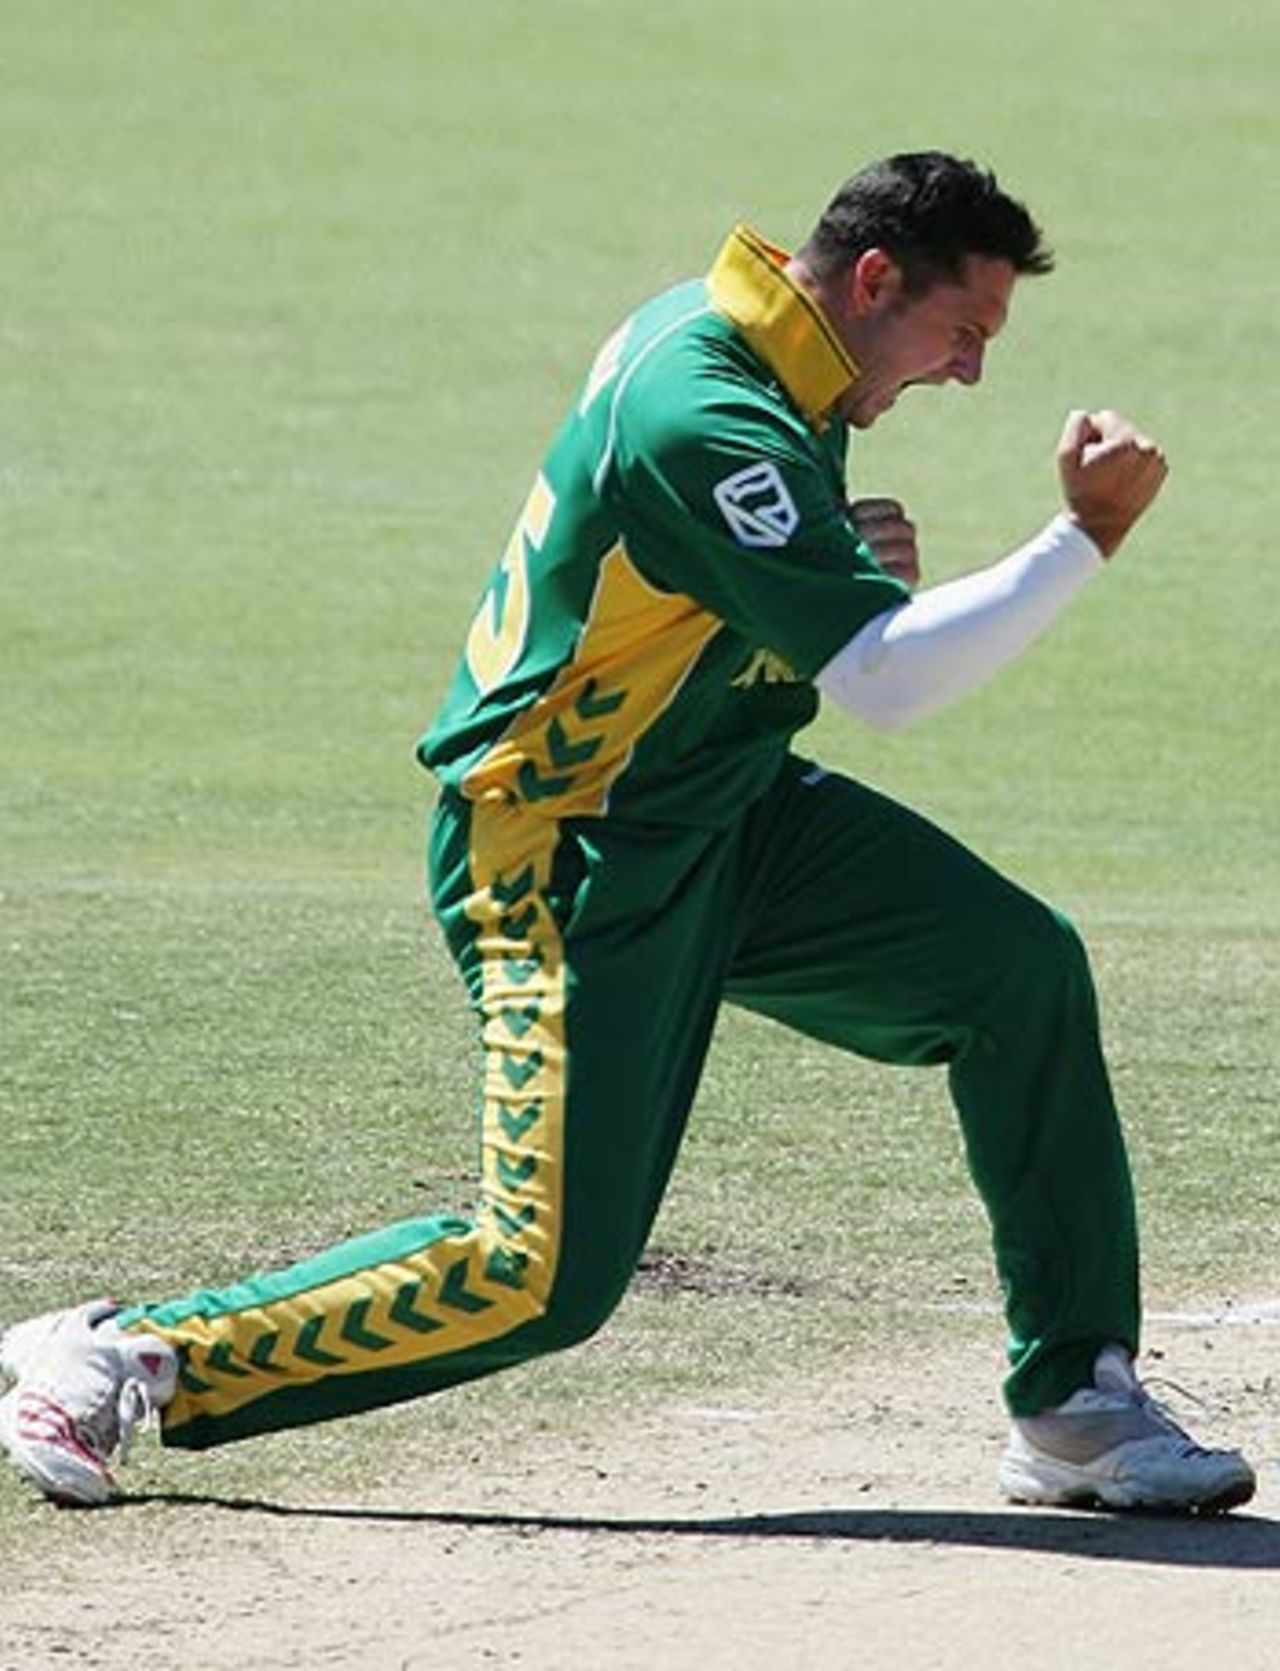 Graeme Smith pumps his fists after claiming a third wicket, South Africa v Sri Lanka, 9th match, VB Series, Perth, January 31, 2006